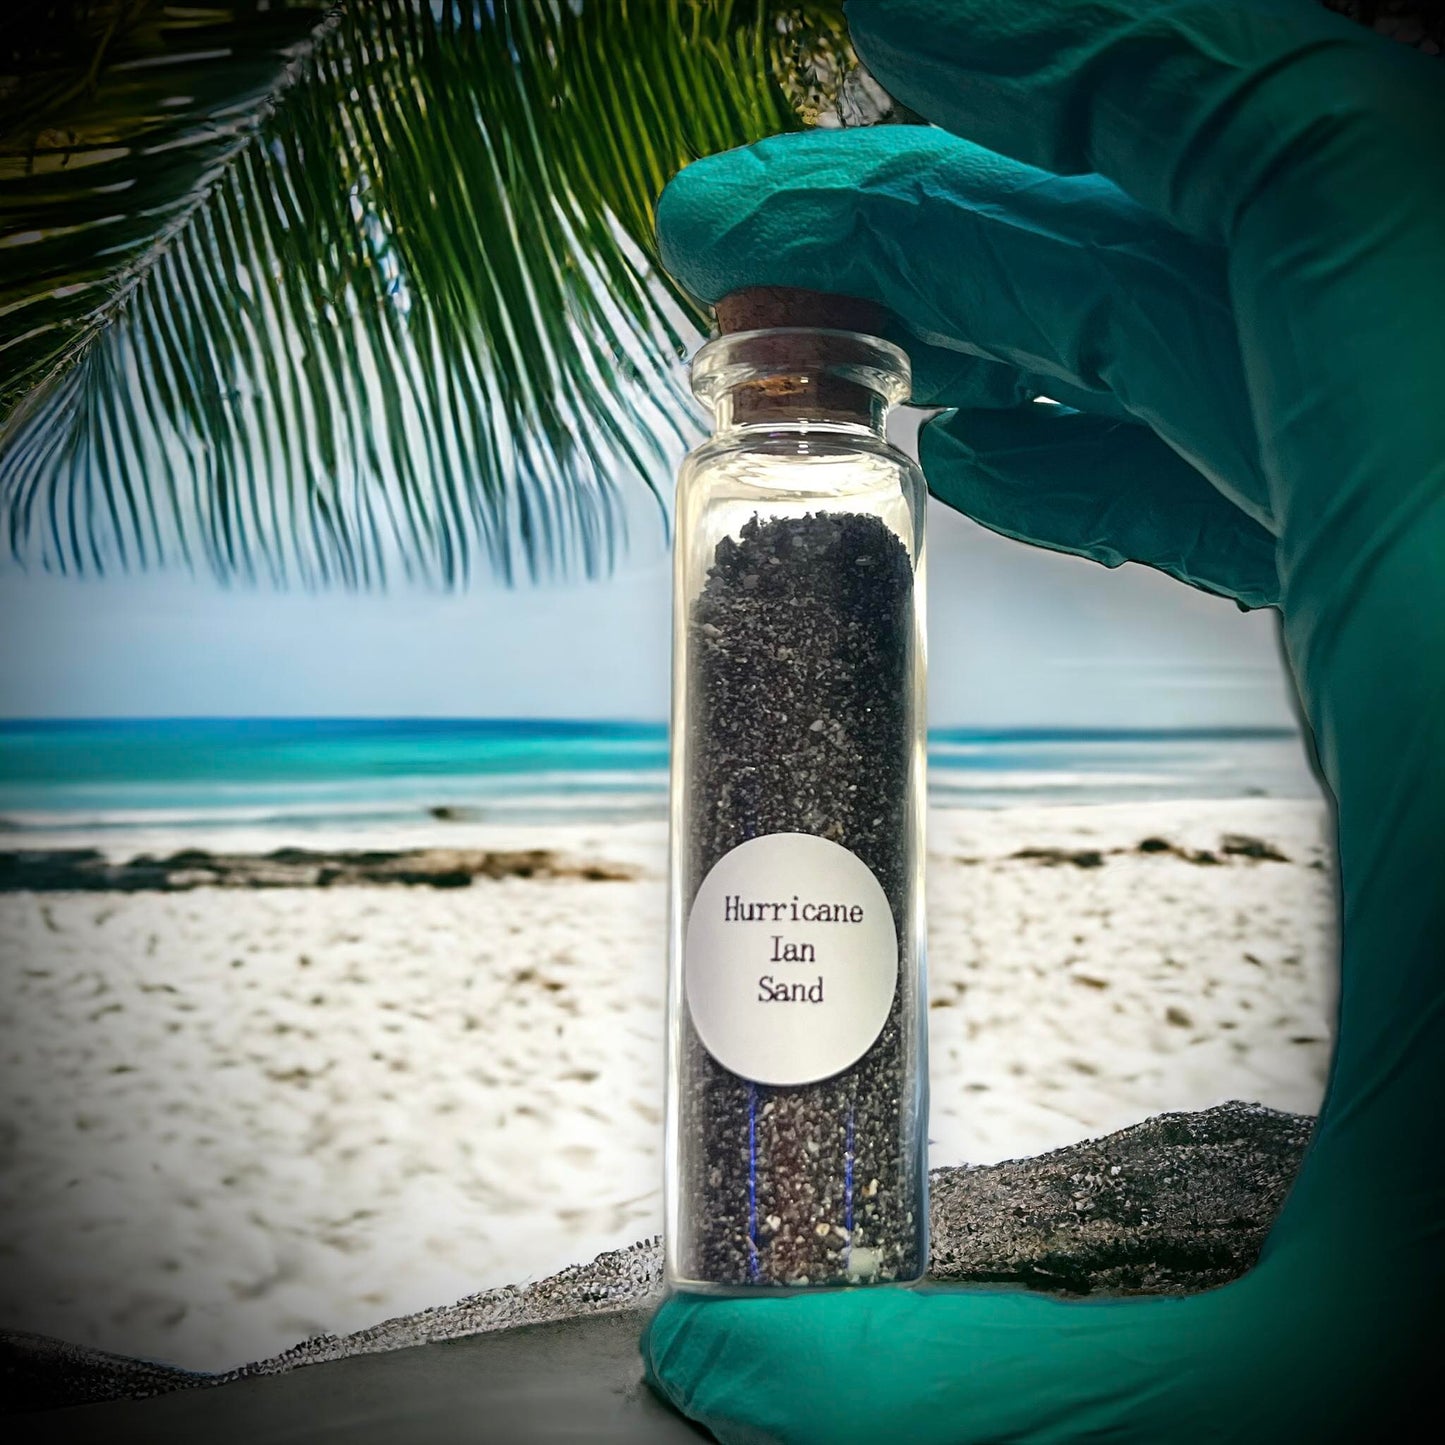 Hurricane Ian Sand Specimen in Glass Vail Curiosity, Oddity, Real Natural Disasters, Apothecary, Unique Gift Idea Gulf Ocean Storm Debris